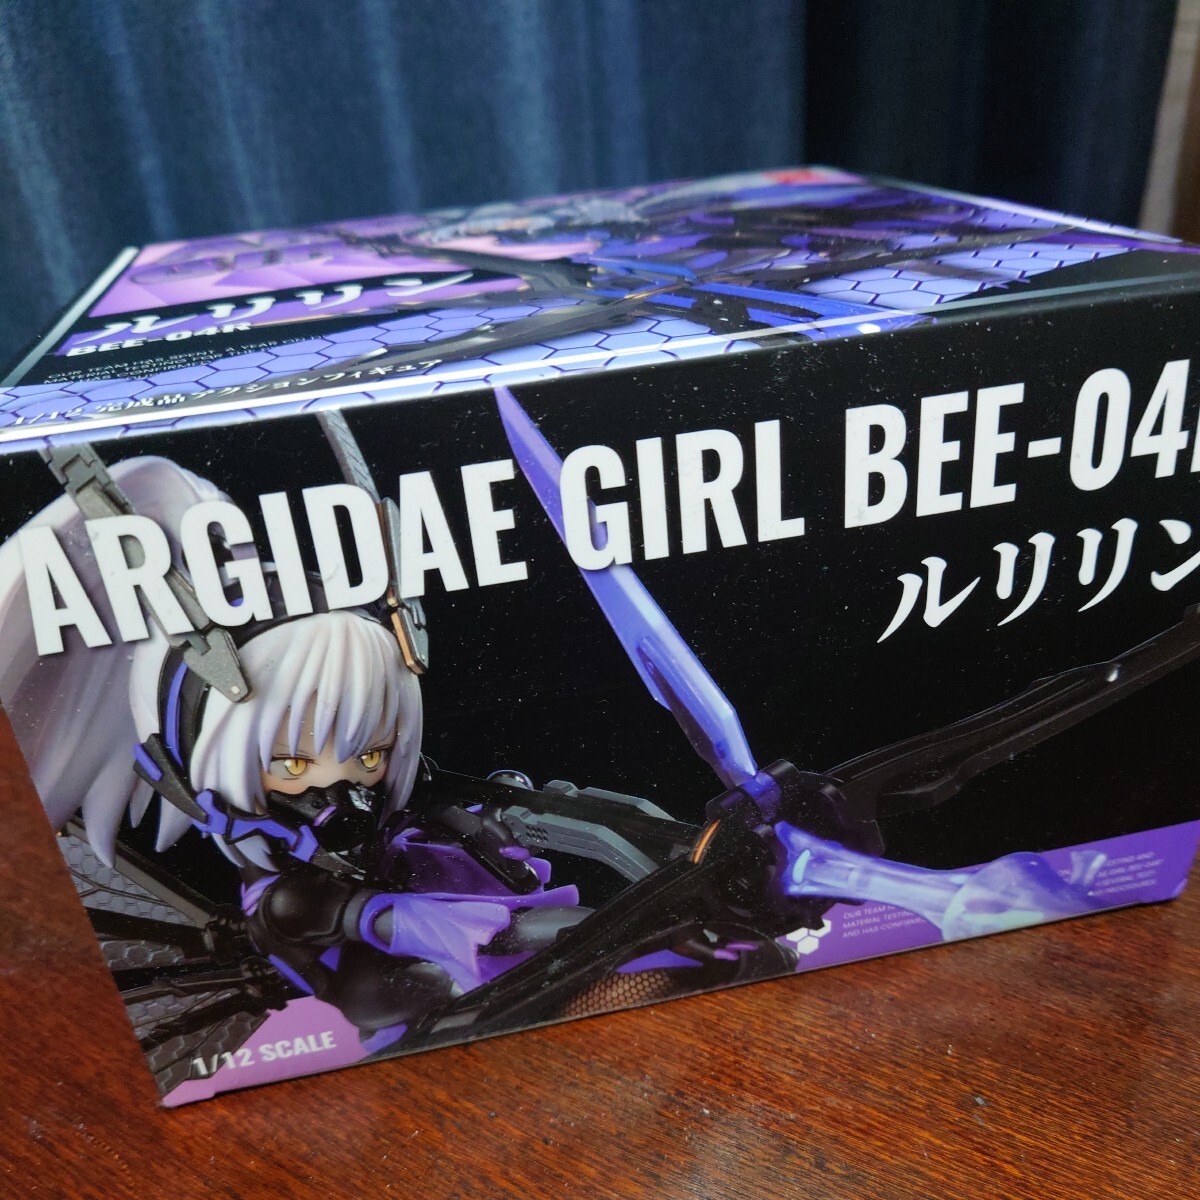  new goods unopened ... Studio 1/12 BEE-04R ARGIDAE GIRLruli Lynn final product action figure total height approximately 16.5cm